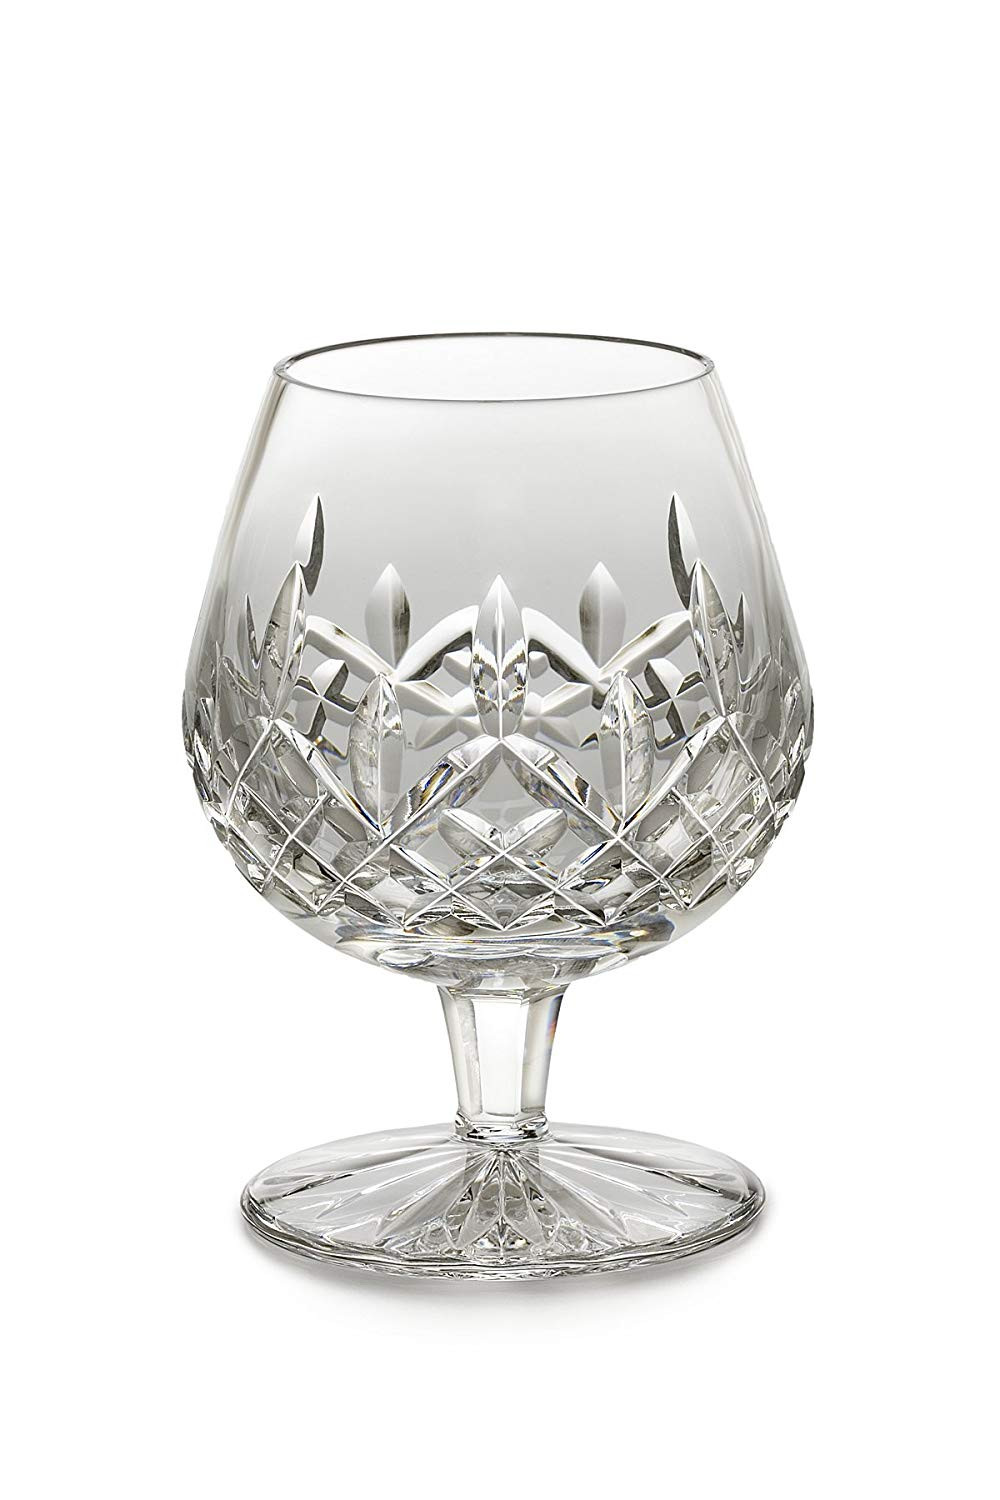 15 Stunning Marquis by Waterford 9 Inch Vase 2024 free download marquis by waterford 9 inch vase of amazon com waterford lismore brandy balloon 12 ounce snifter intended for amazon com waterford lismore brandy balloon 12 ounce snifter glasses snifters